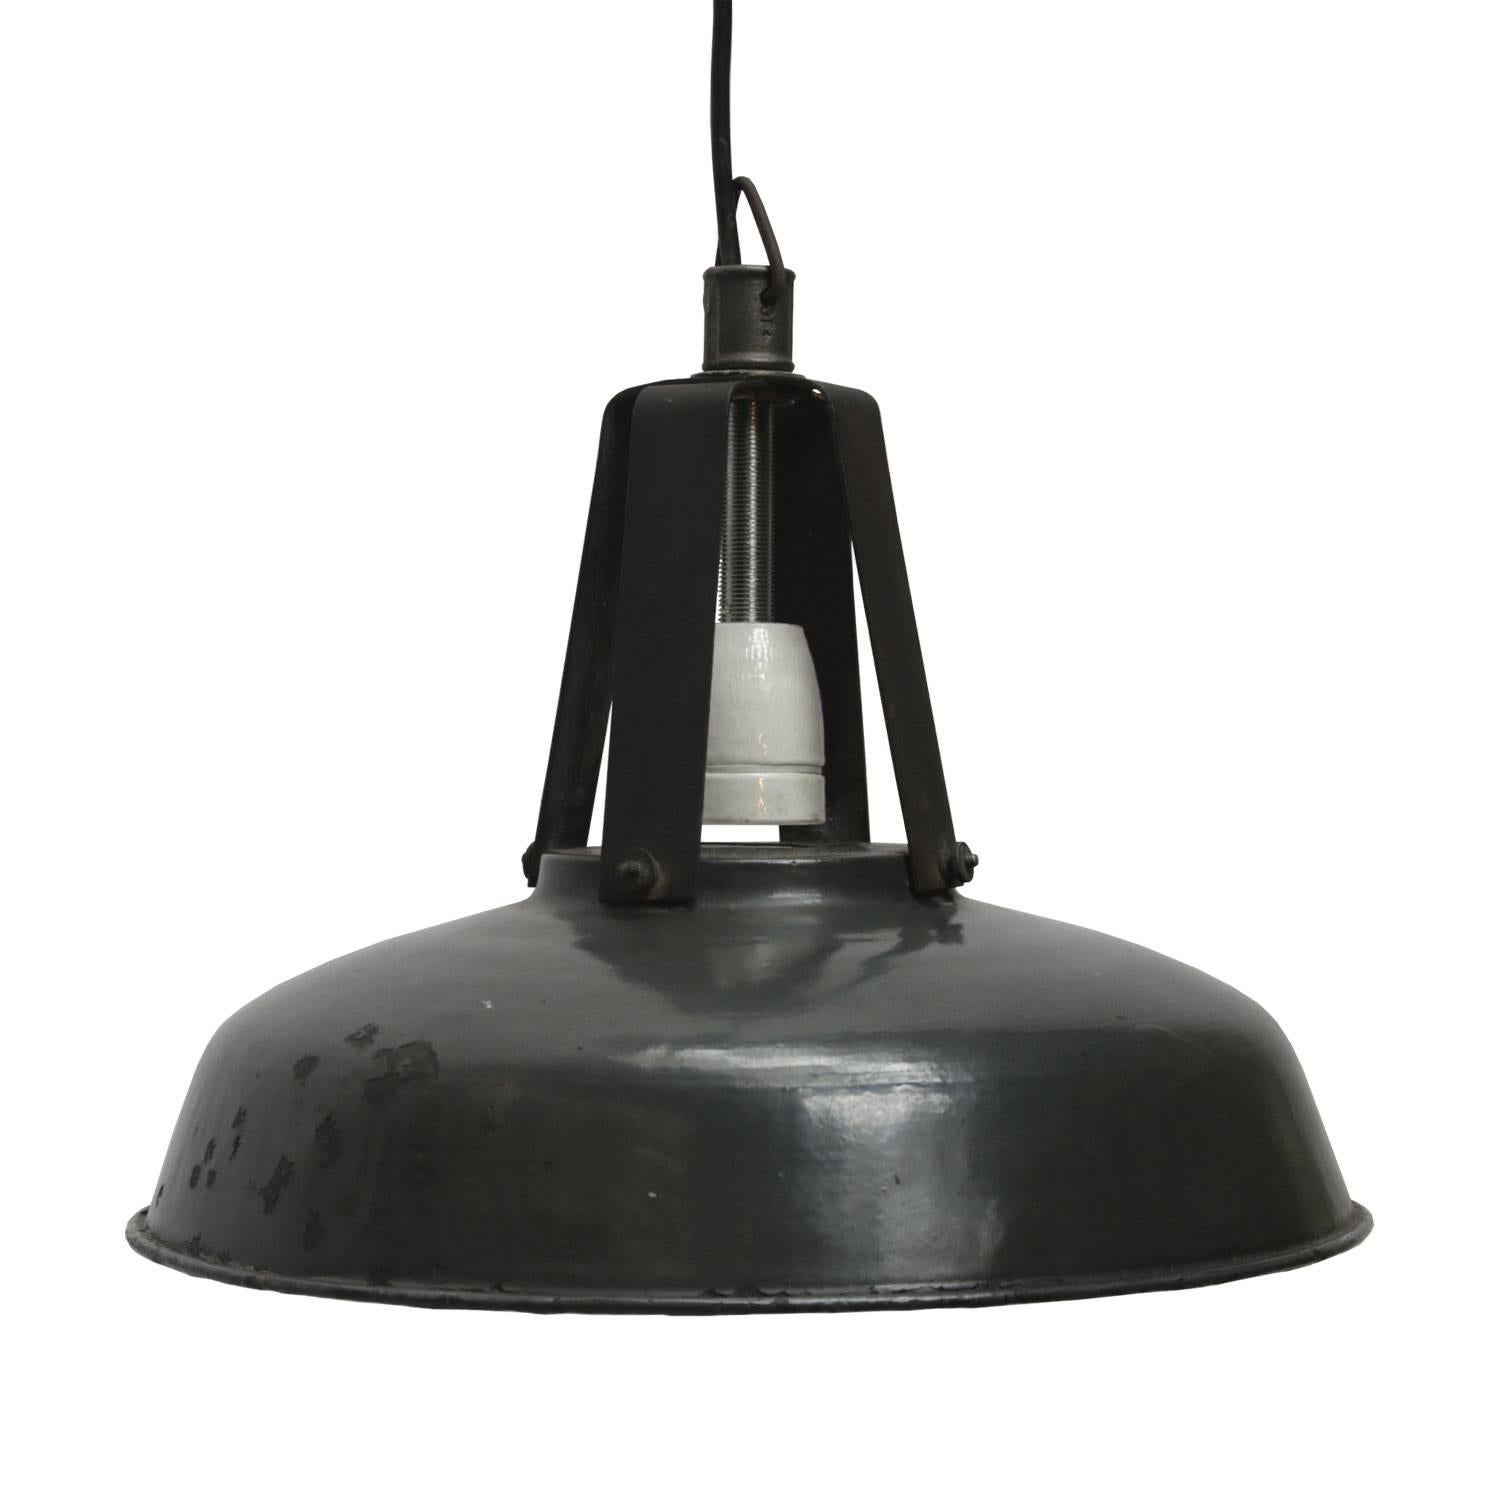 Alton small. French factory pendant.
Black enamel with white interior.

Measure: Weight 1.0 kg / 2.2 lb

All lamps have been made suitable by international standards for incandescent light bulbs, energy-efficient and LED bulbs. E26/E27 bulb